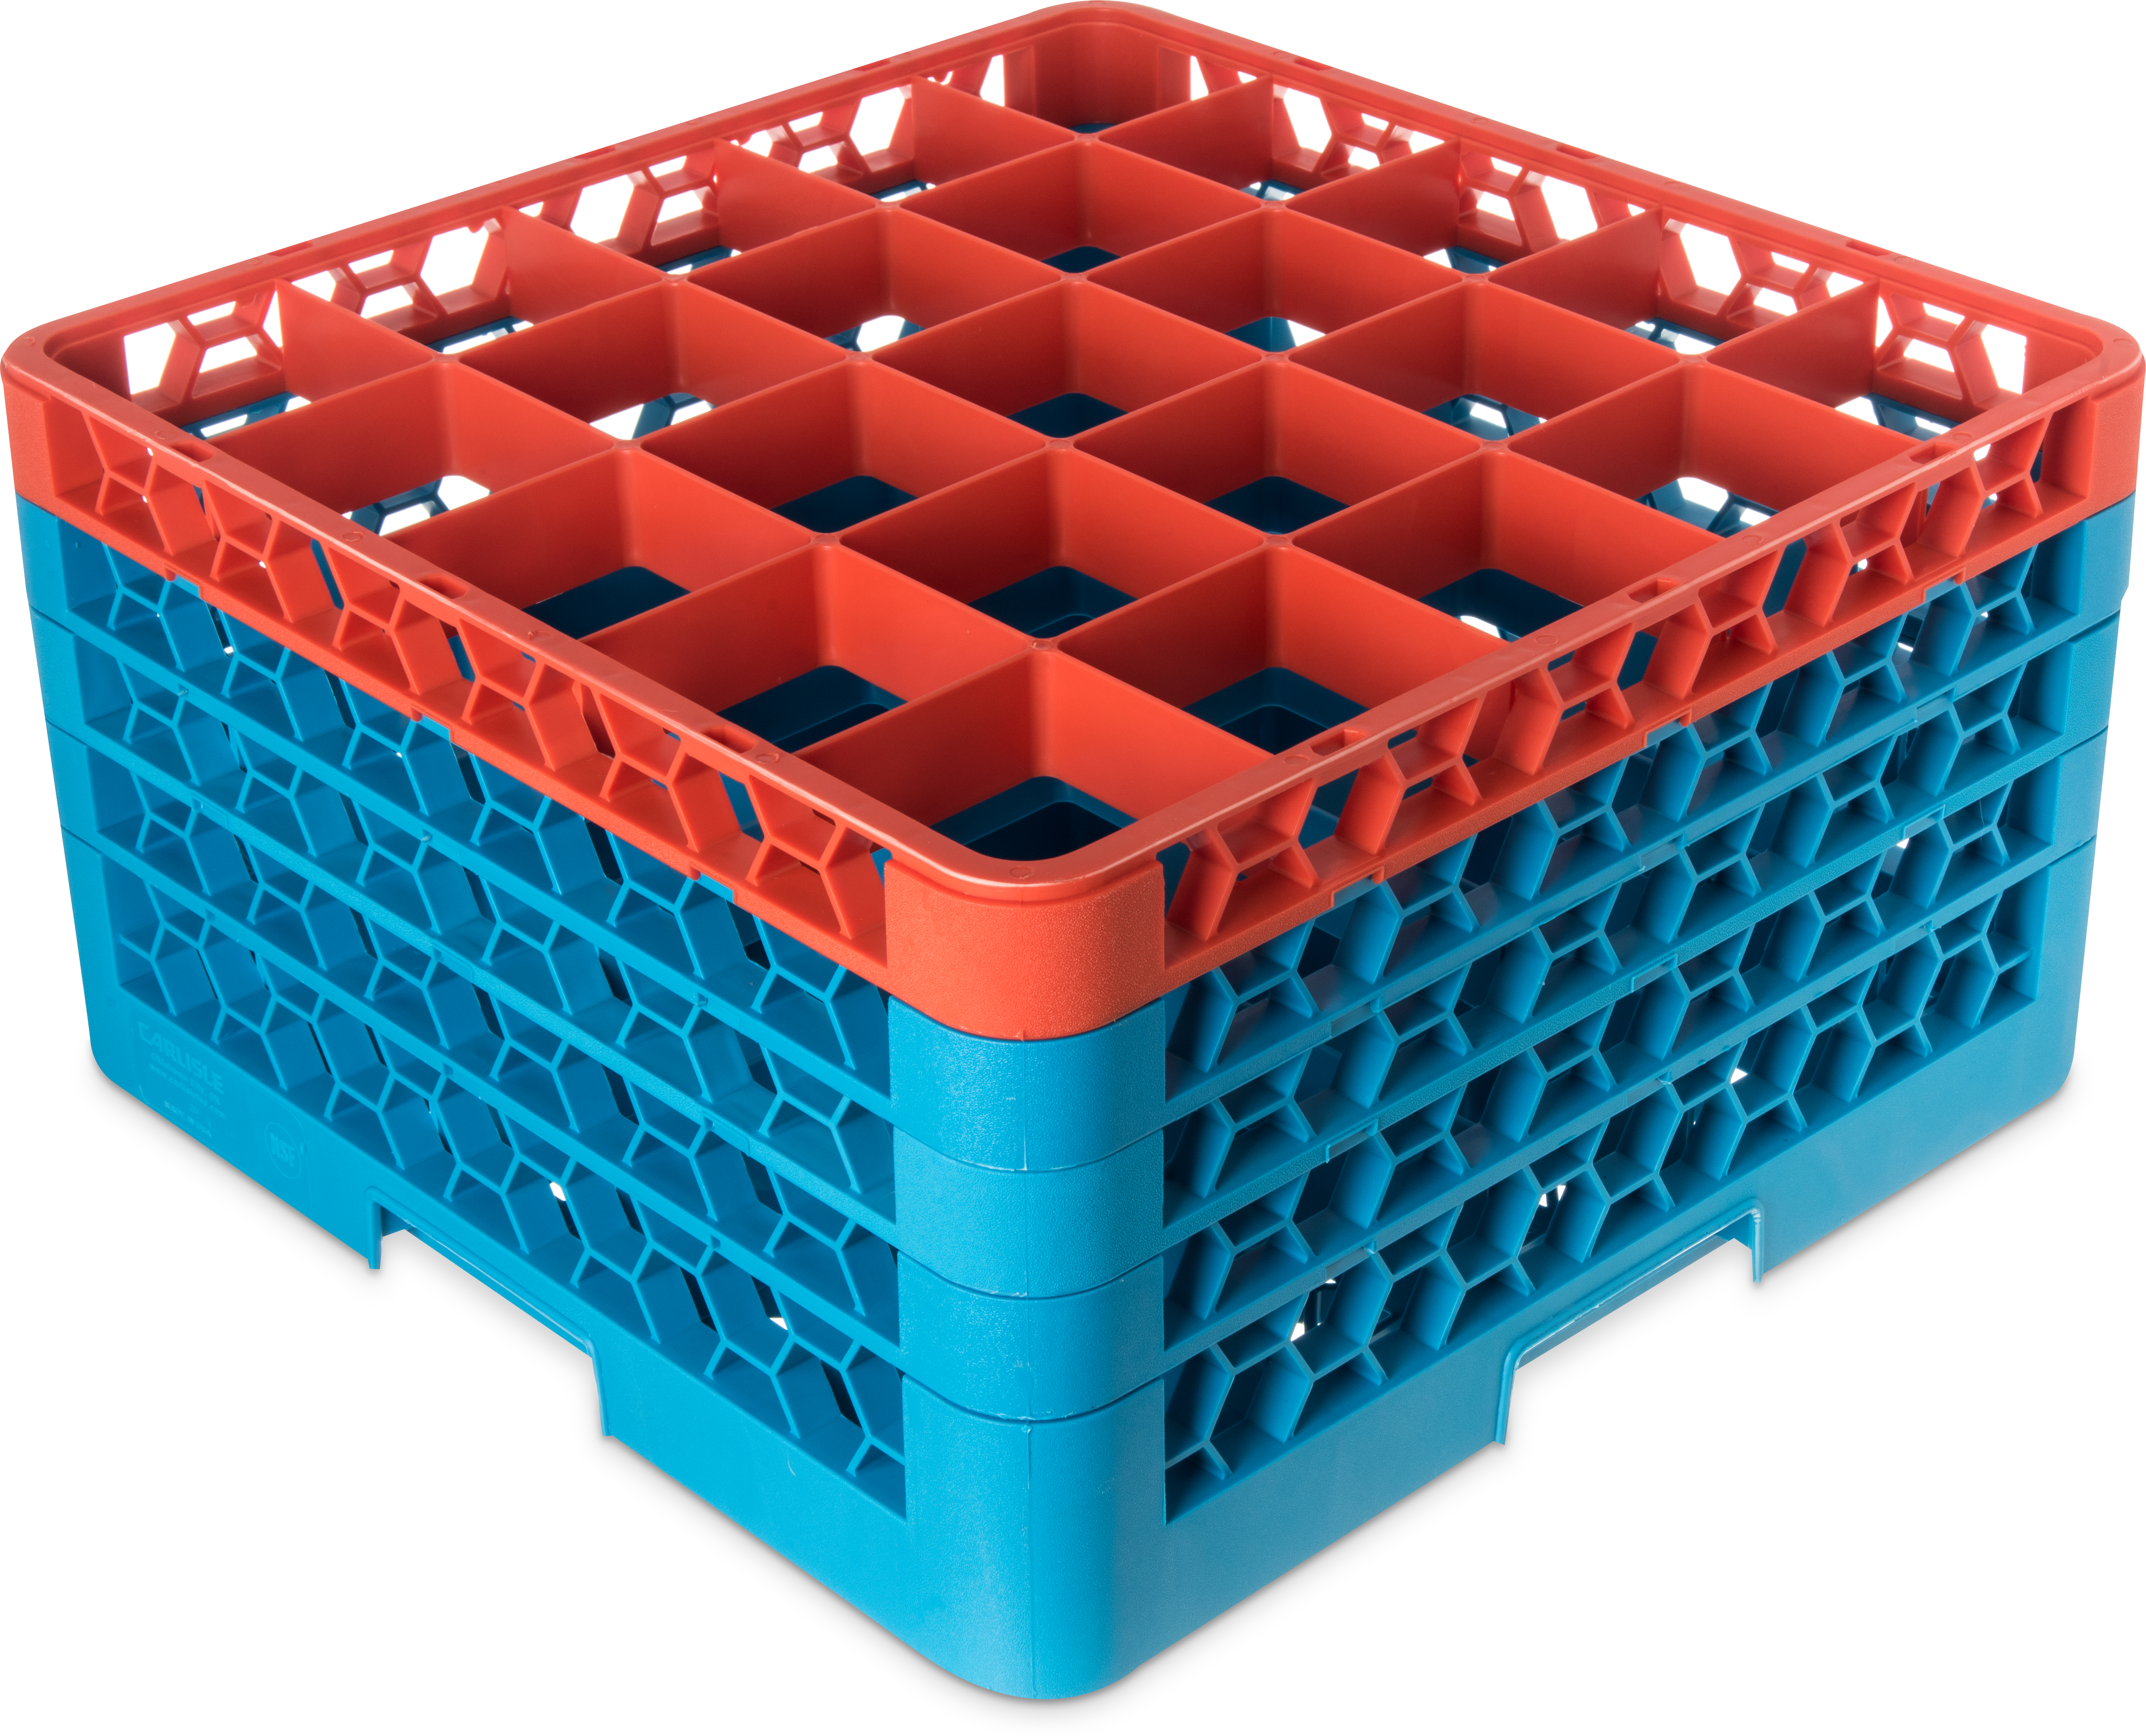 OptiClean 25 Compartment Glass Rack with 4 Extenders 10.3 - Orange-Carlisle Blue